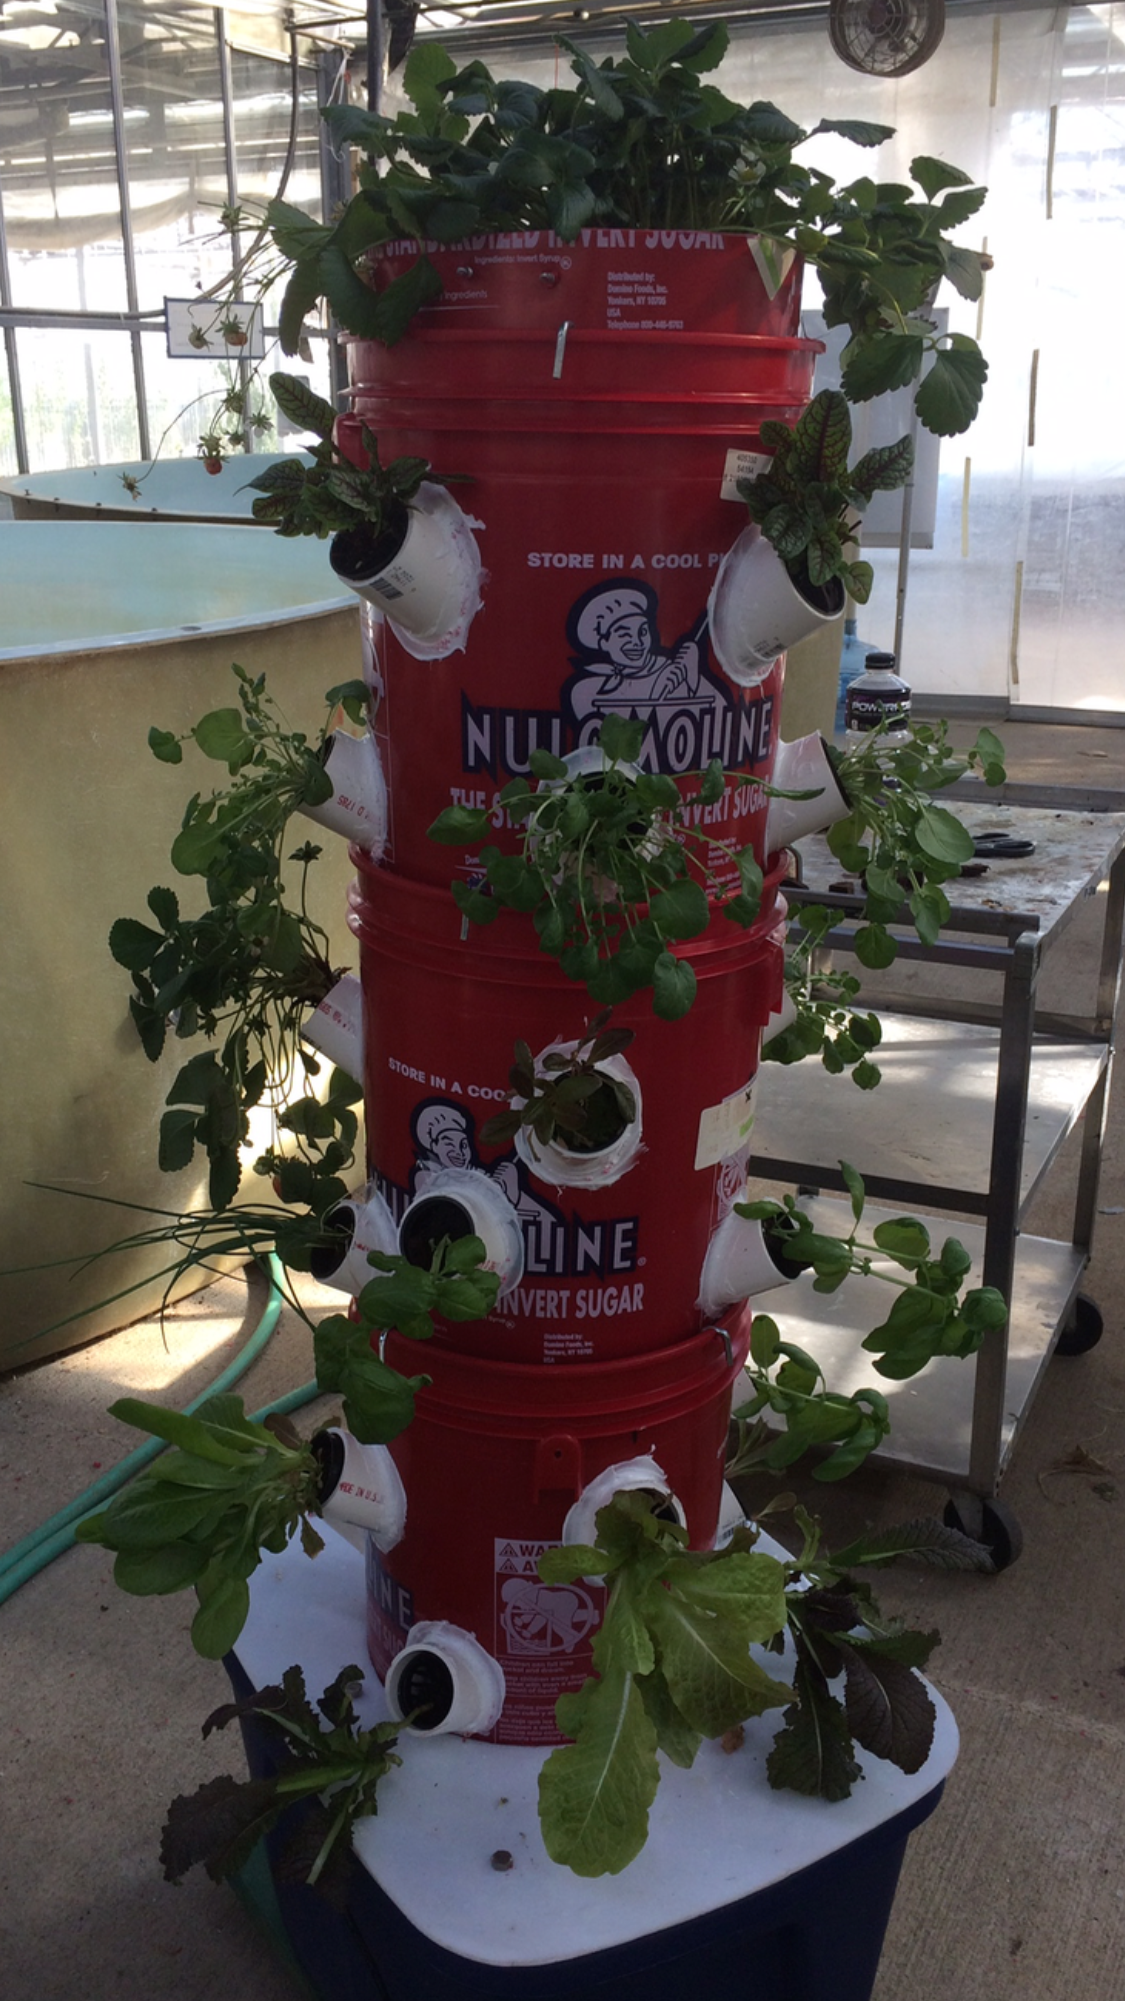 Engineering for Sustainability - Hydroponics Design